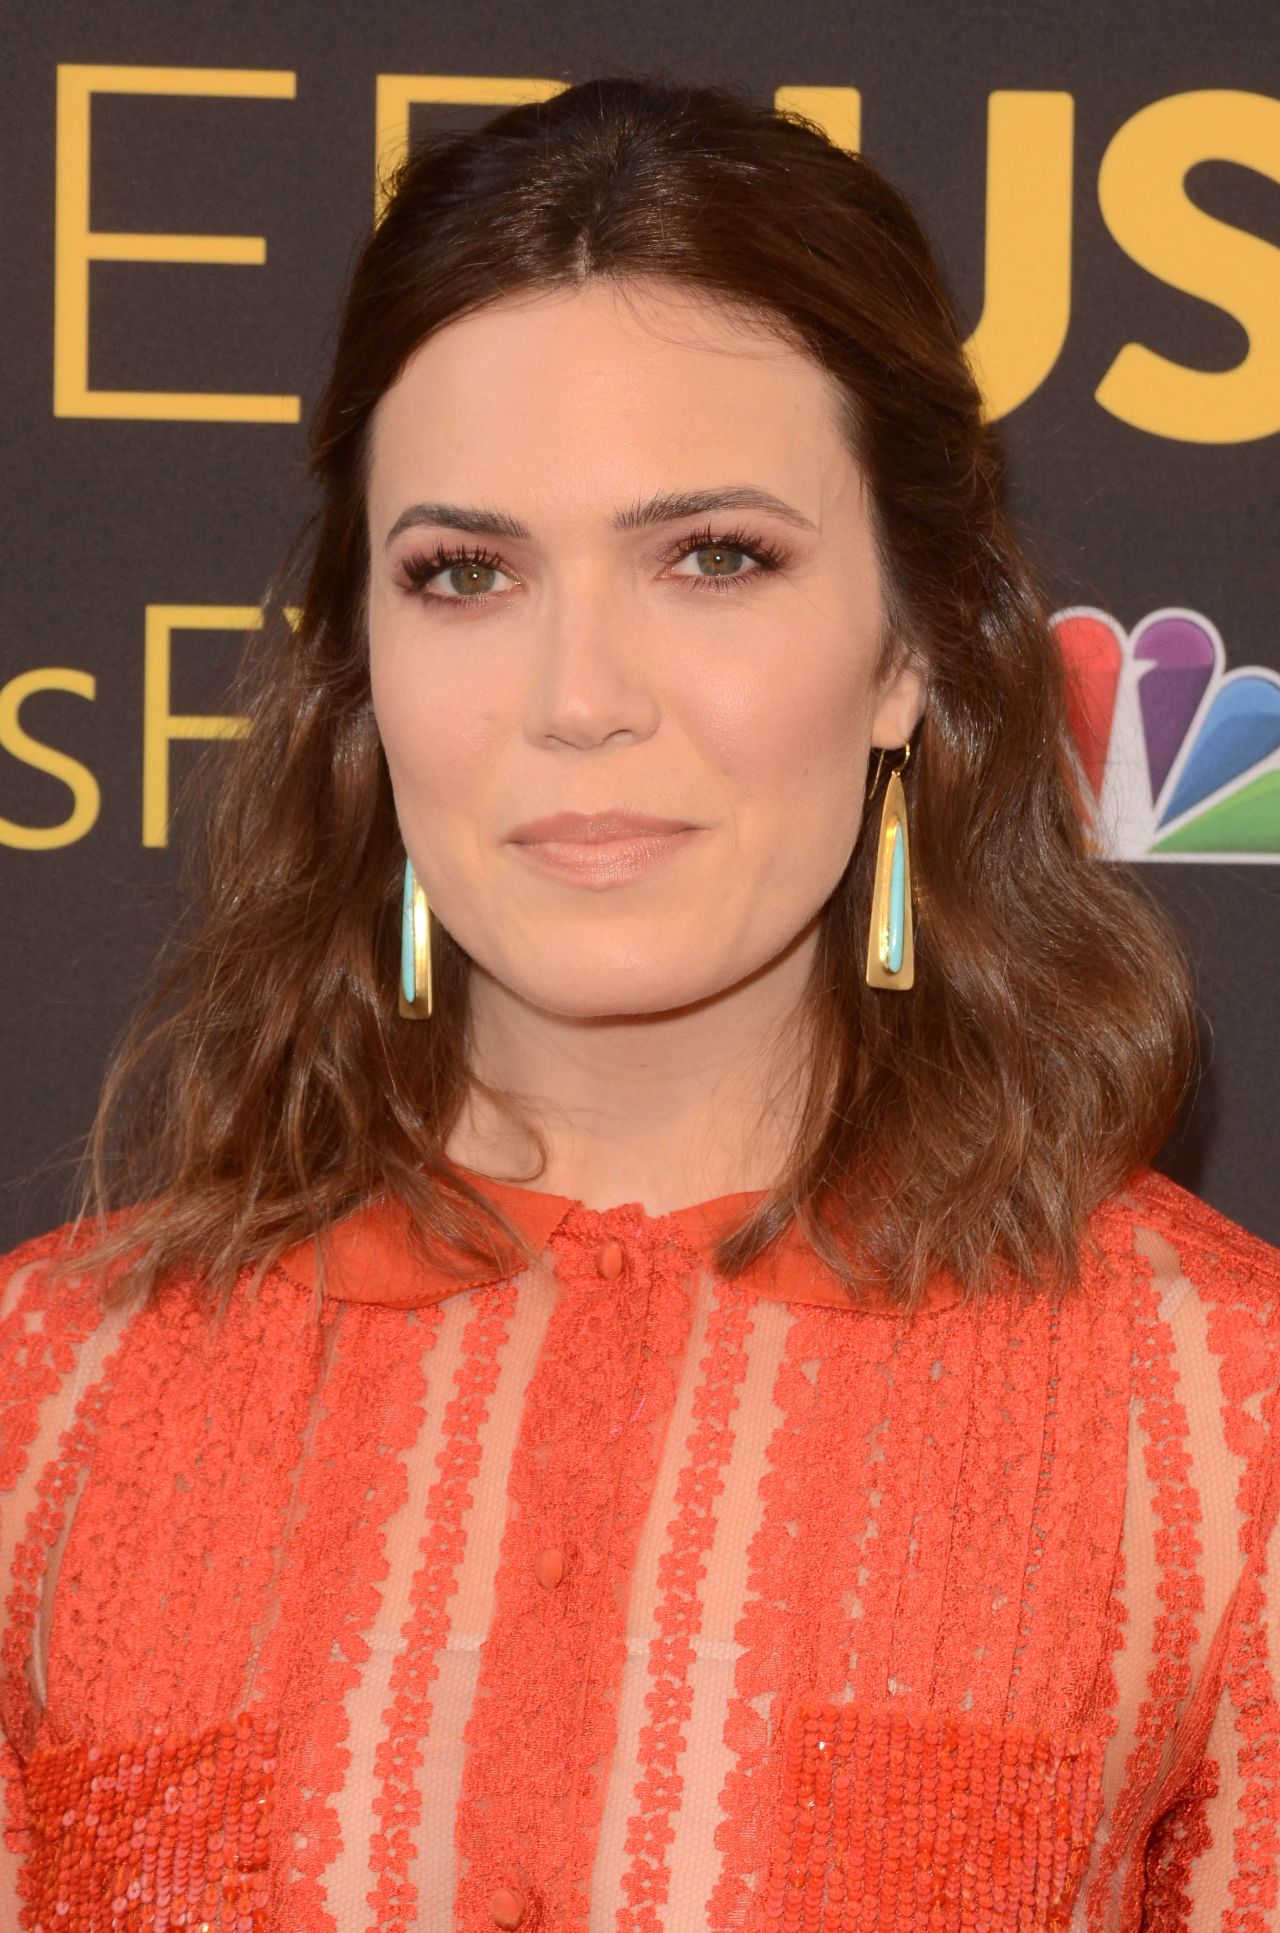 Mandy Moore "This Is Us" TV Show Event in LA 08/14/2017 • CelebMafia